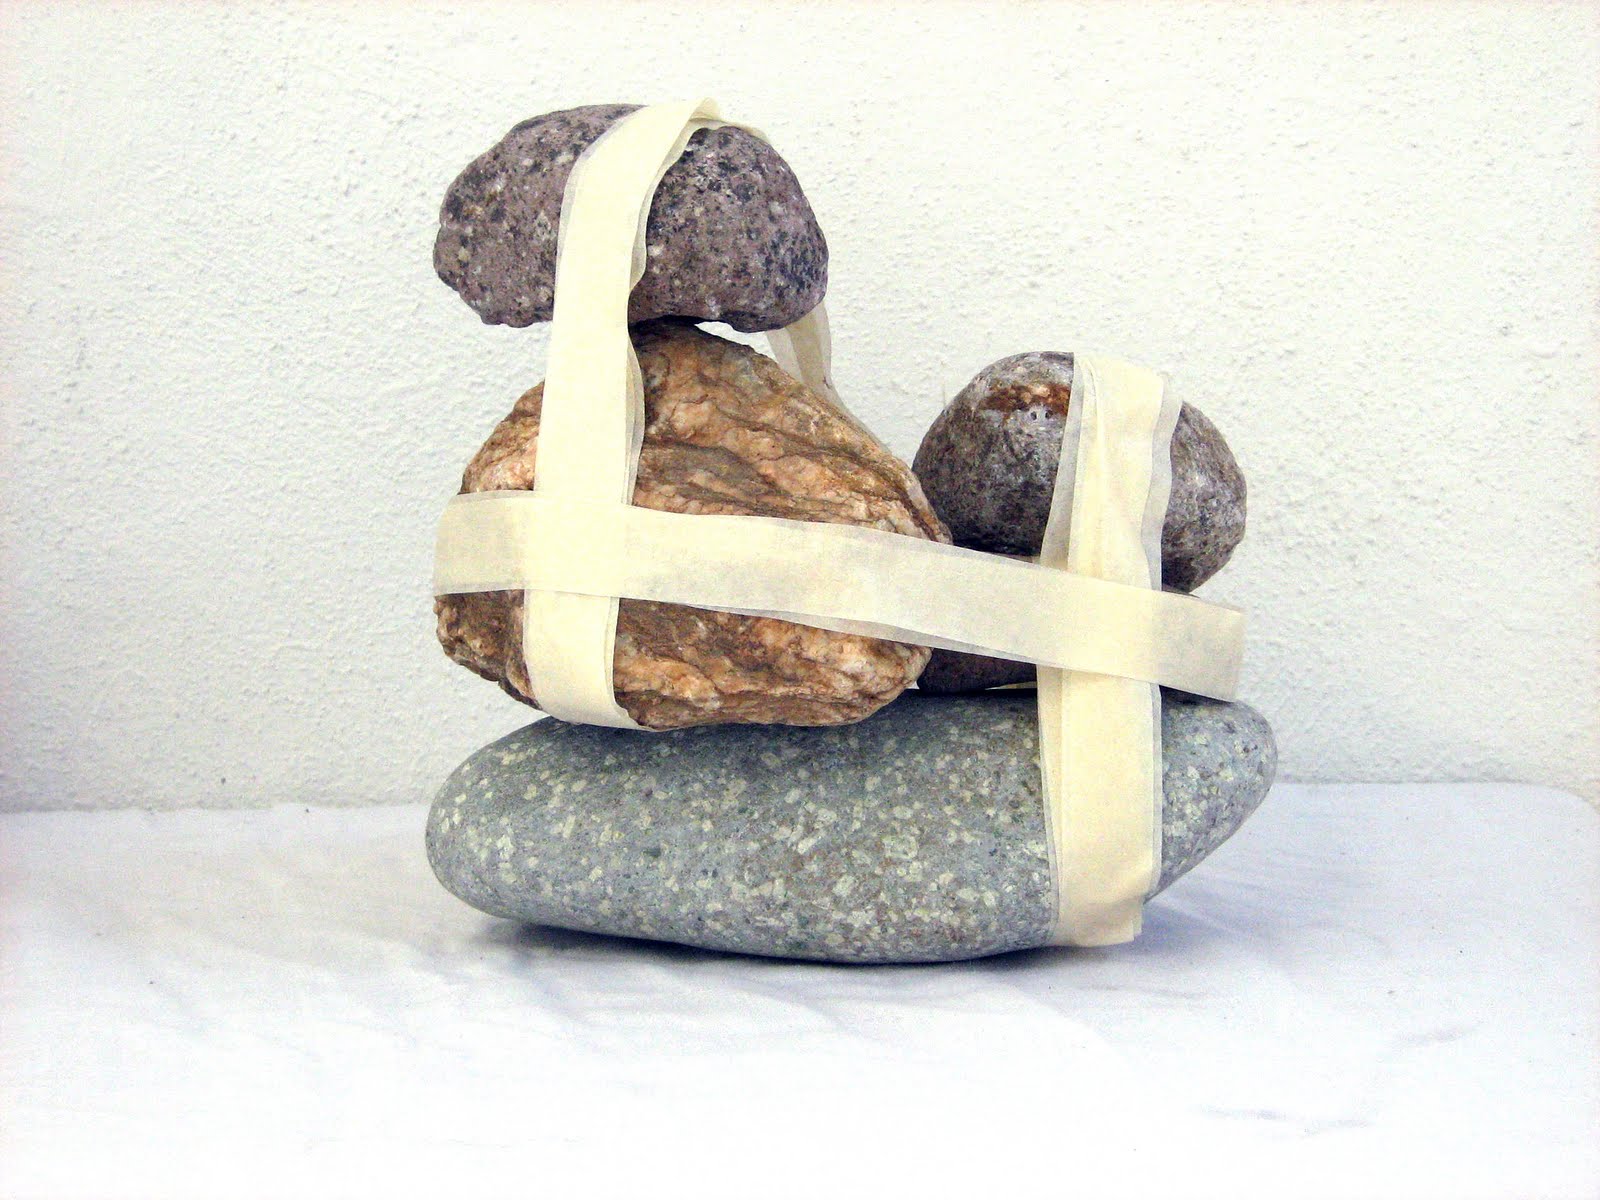 Stones tied with masking tape (VI)